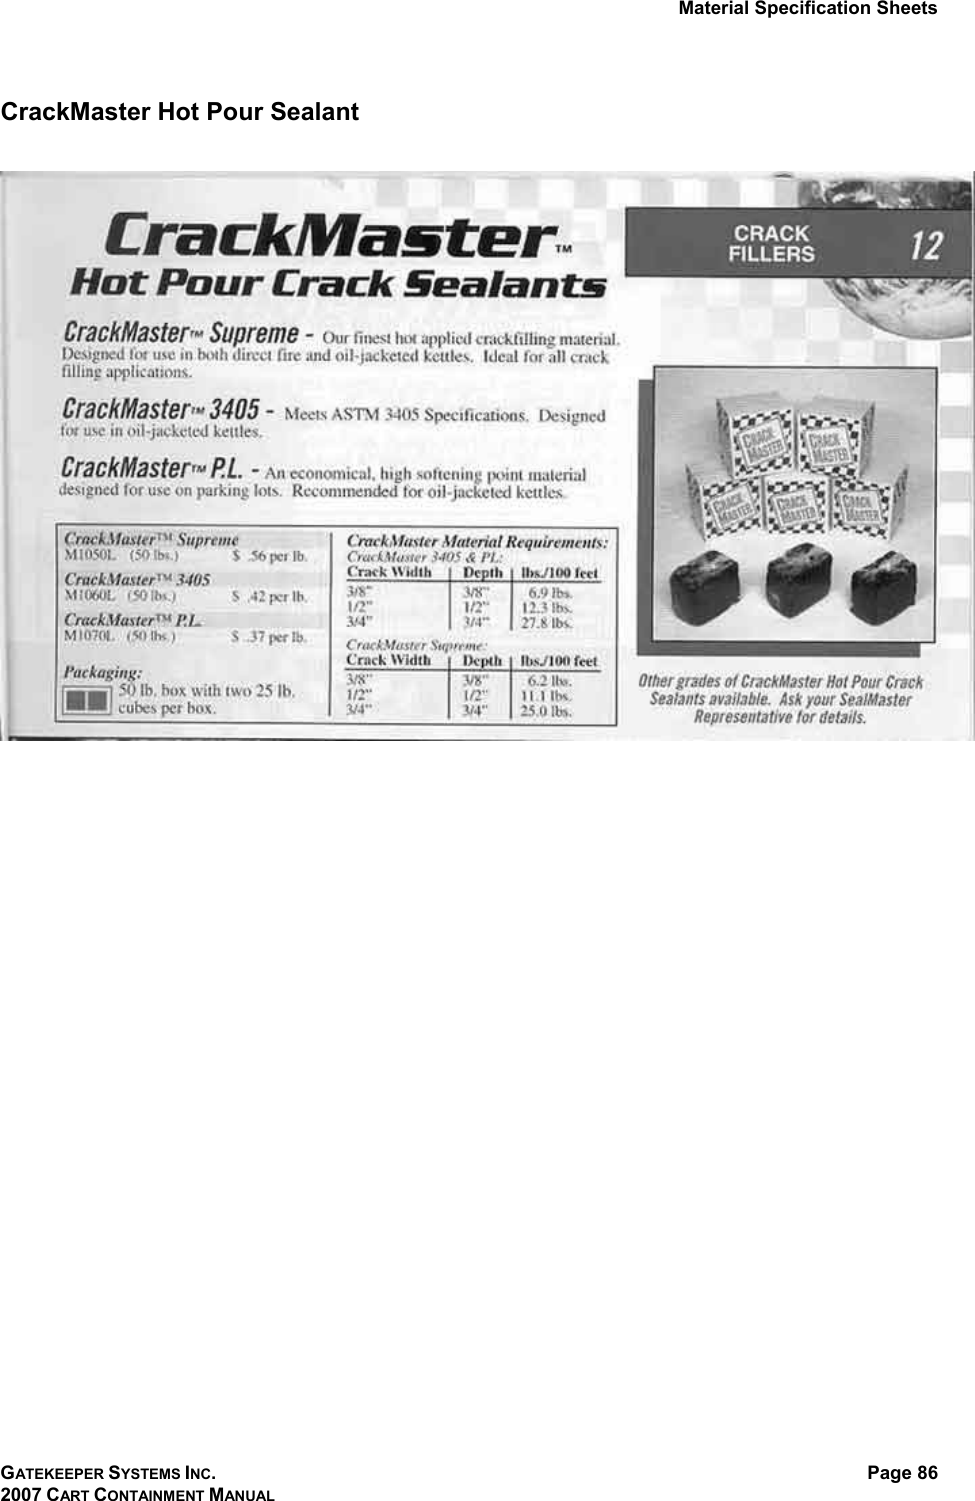 Material Specification Sheets GATEKEEPER SYSTEMS INC. 2007 CART CONTAINMENT MANUAL Page 86  CrackMaster Hot Pour Sealant    